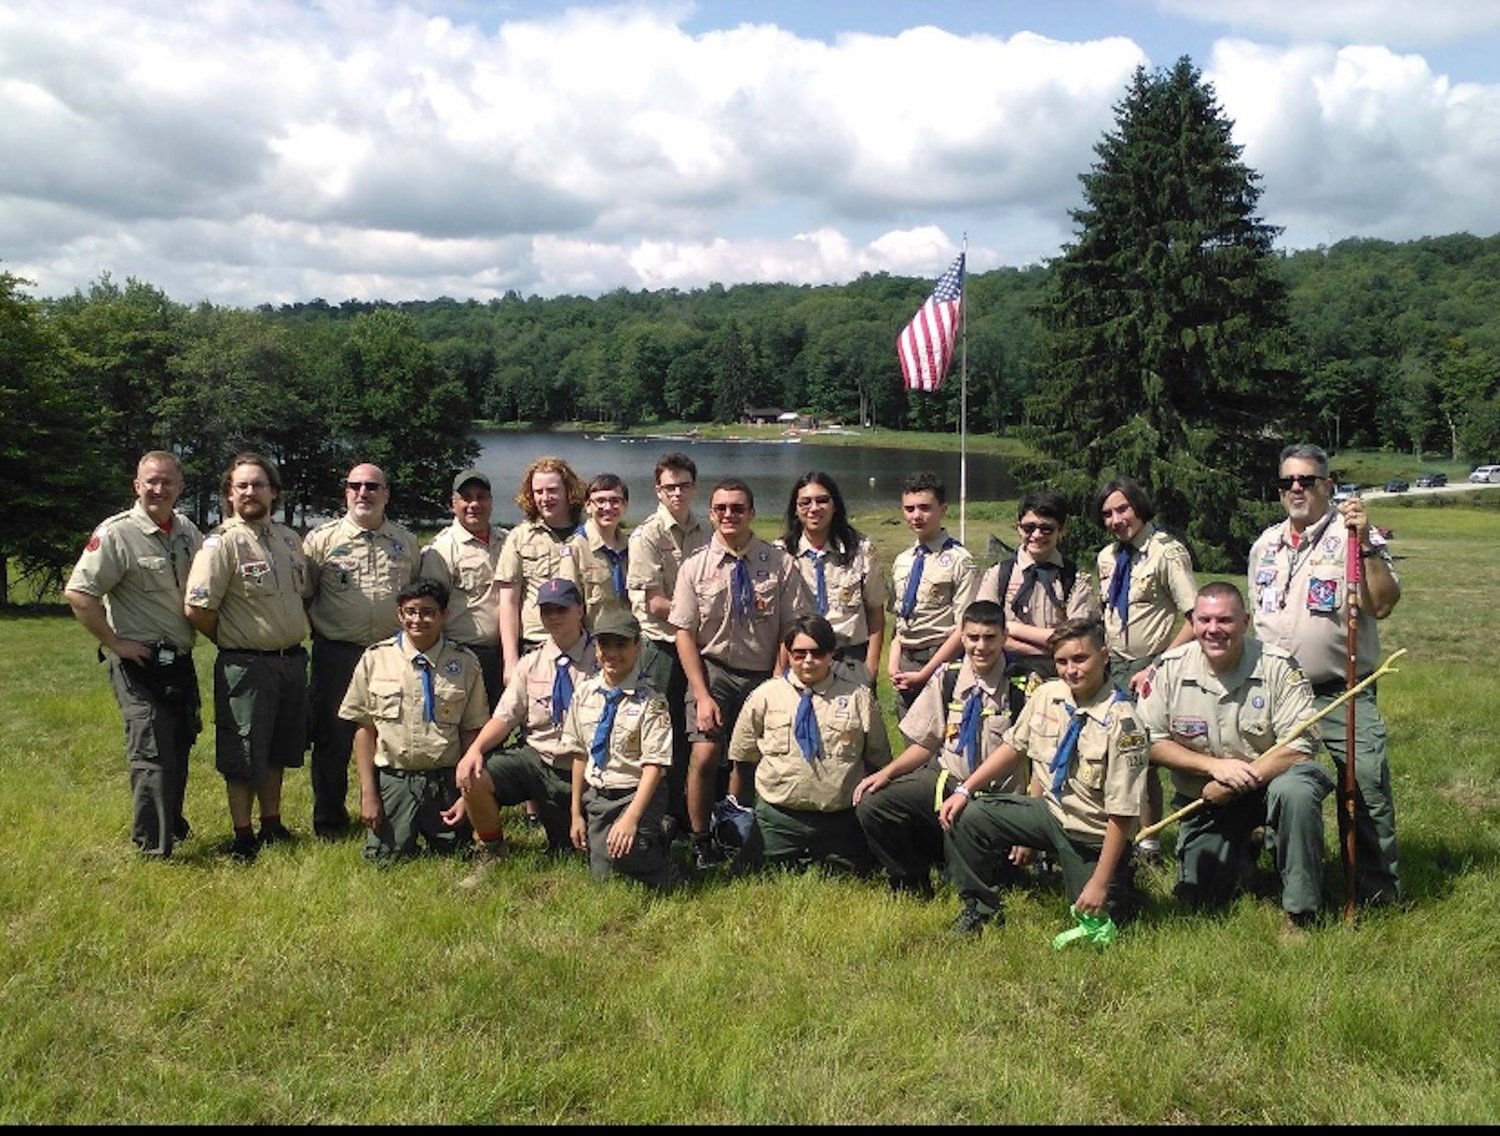 Sincinito has demonstrated leadership for many local scouts.